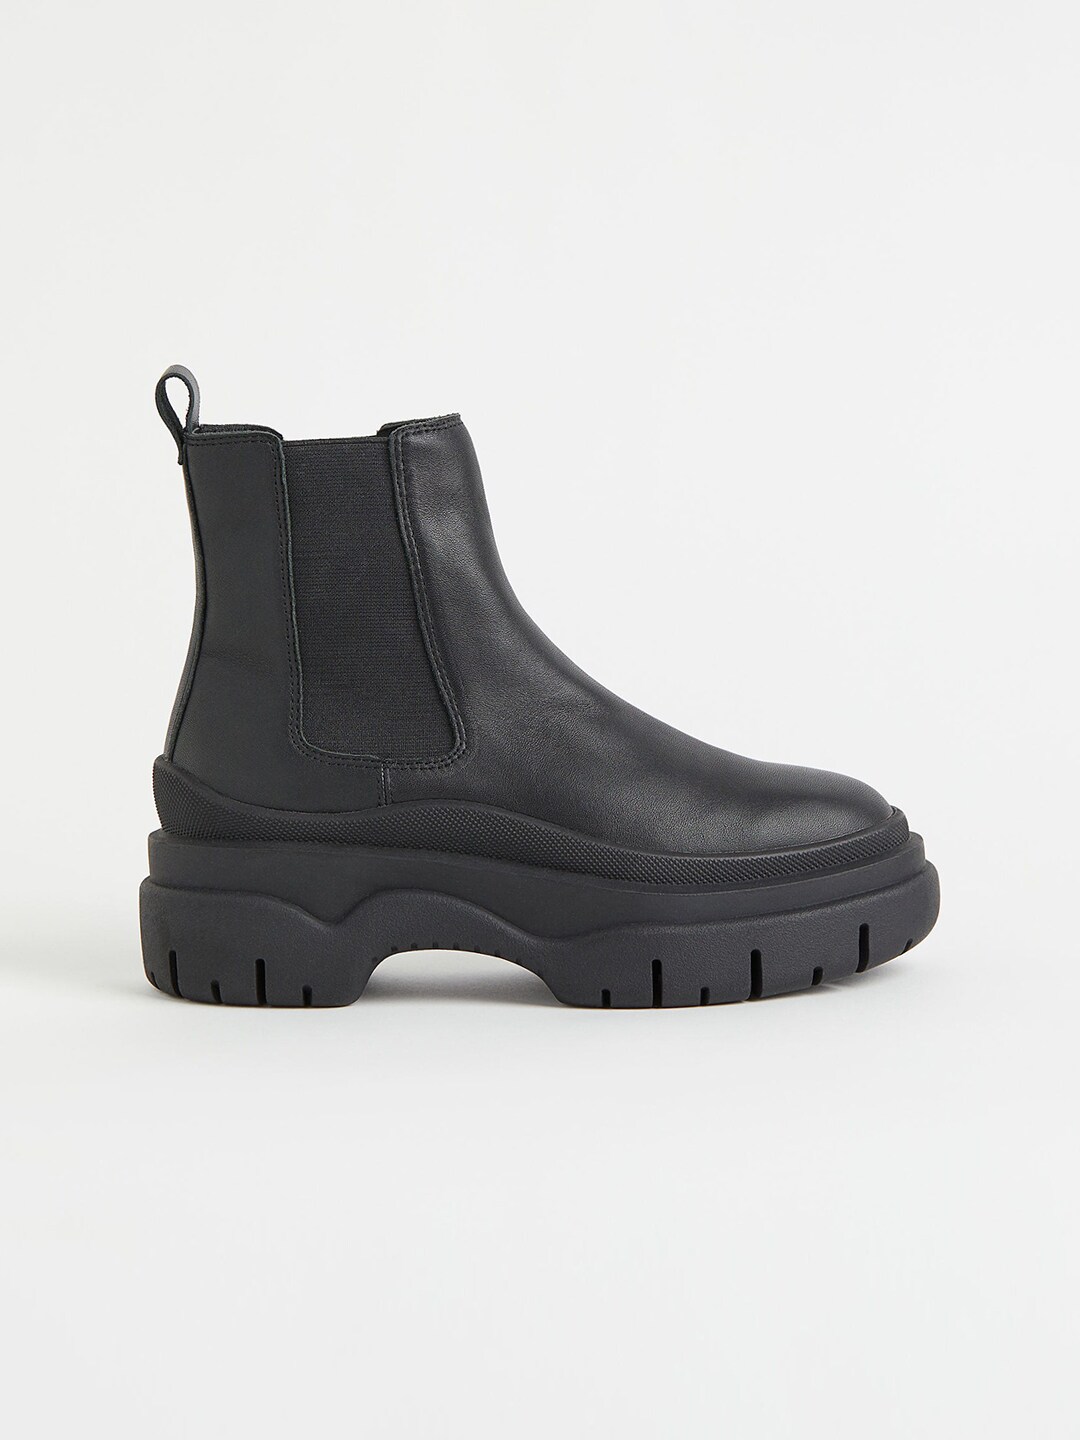 H&M Black Chunky Leather Chelsea Boots Price in India